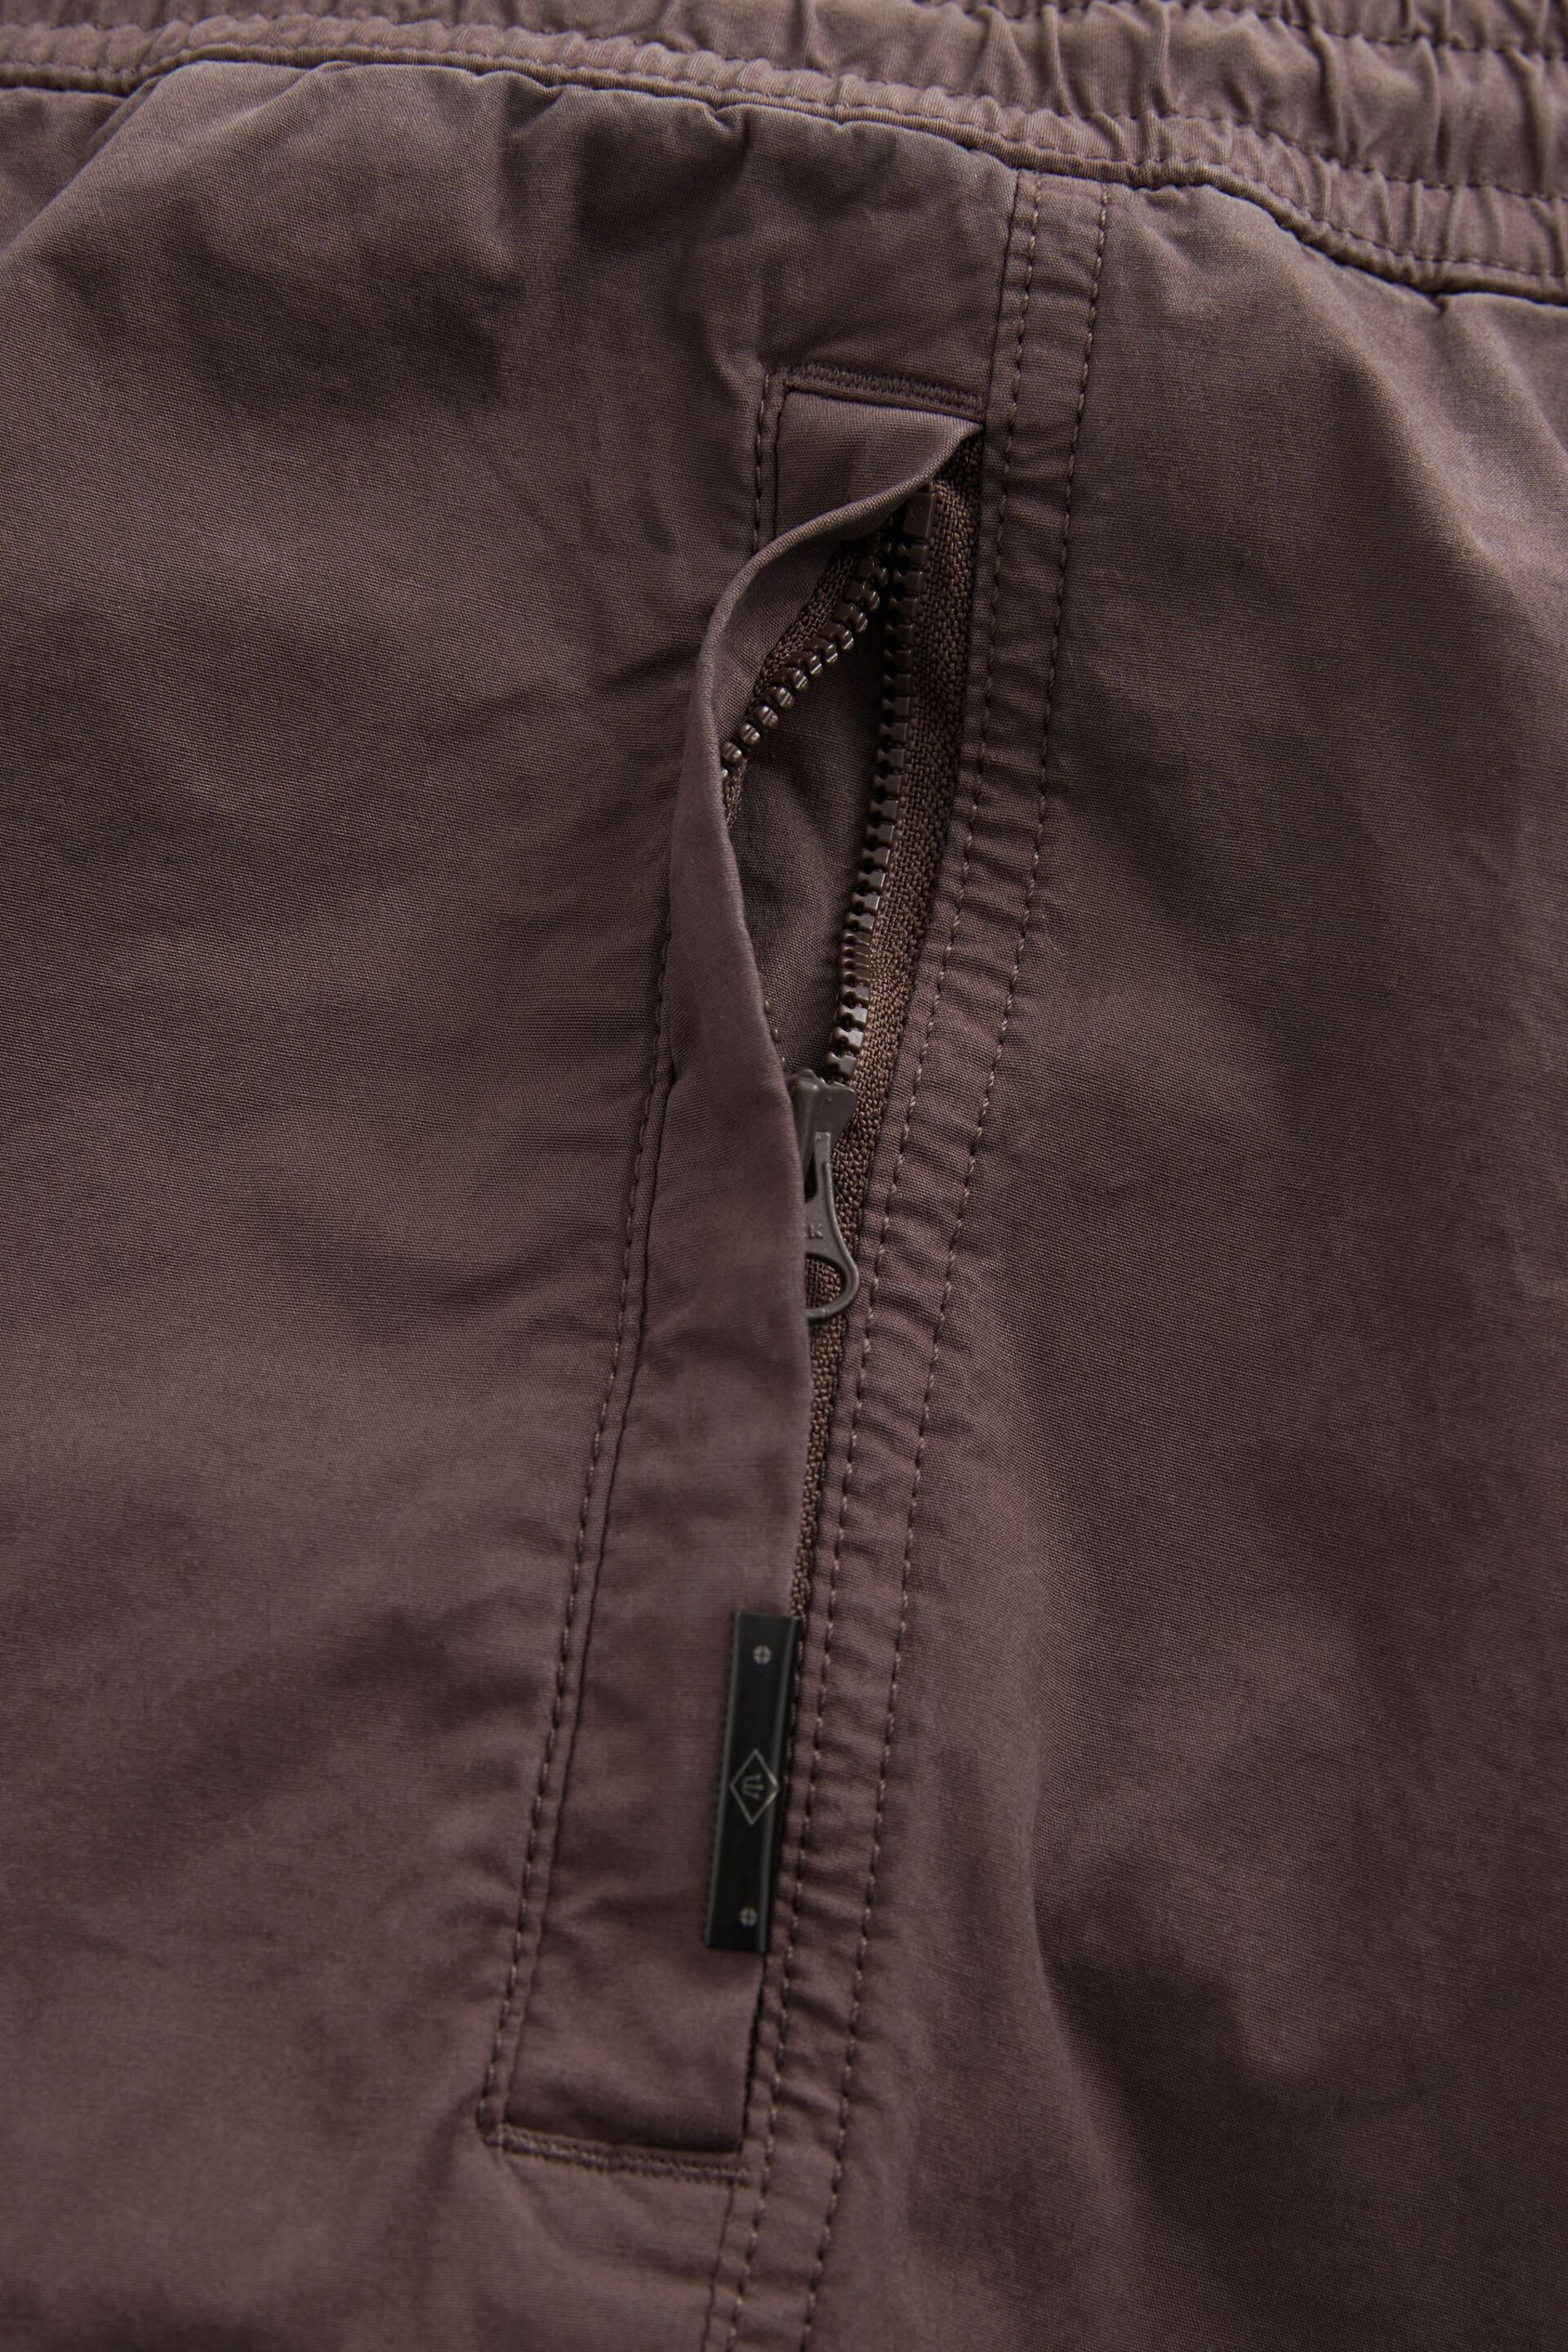 Purple Regular Tapered Stretch Utility Cargo Trousers - Image 4 of 6